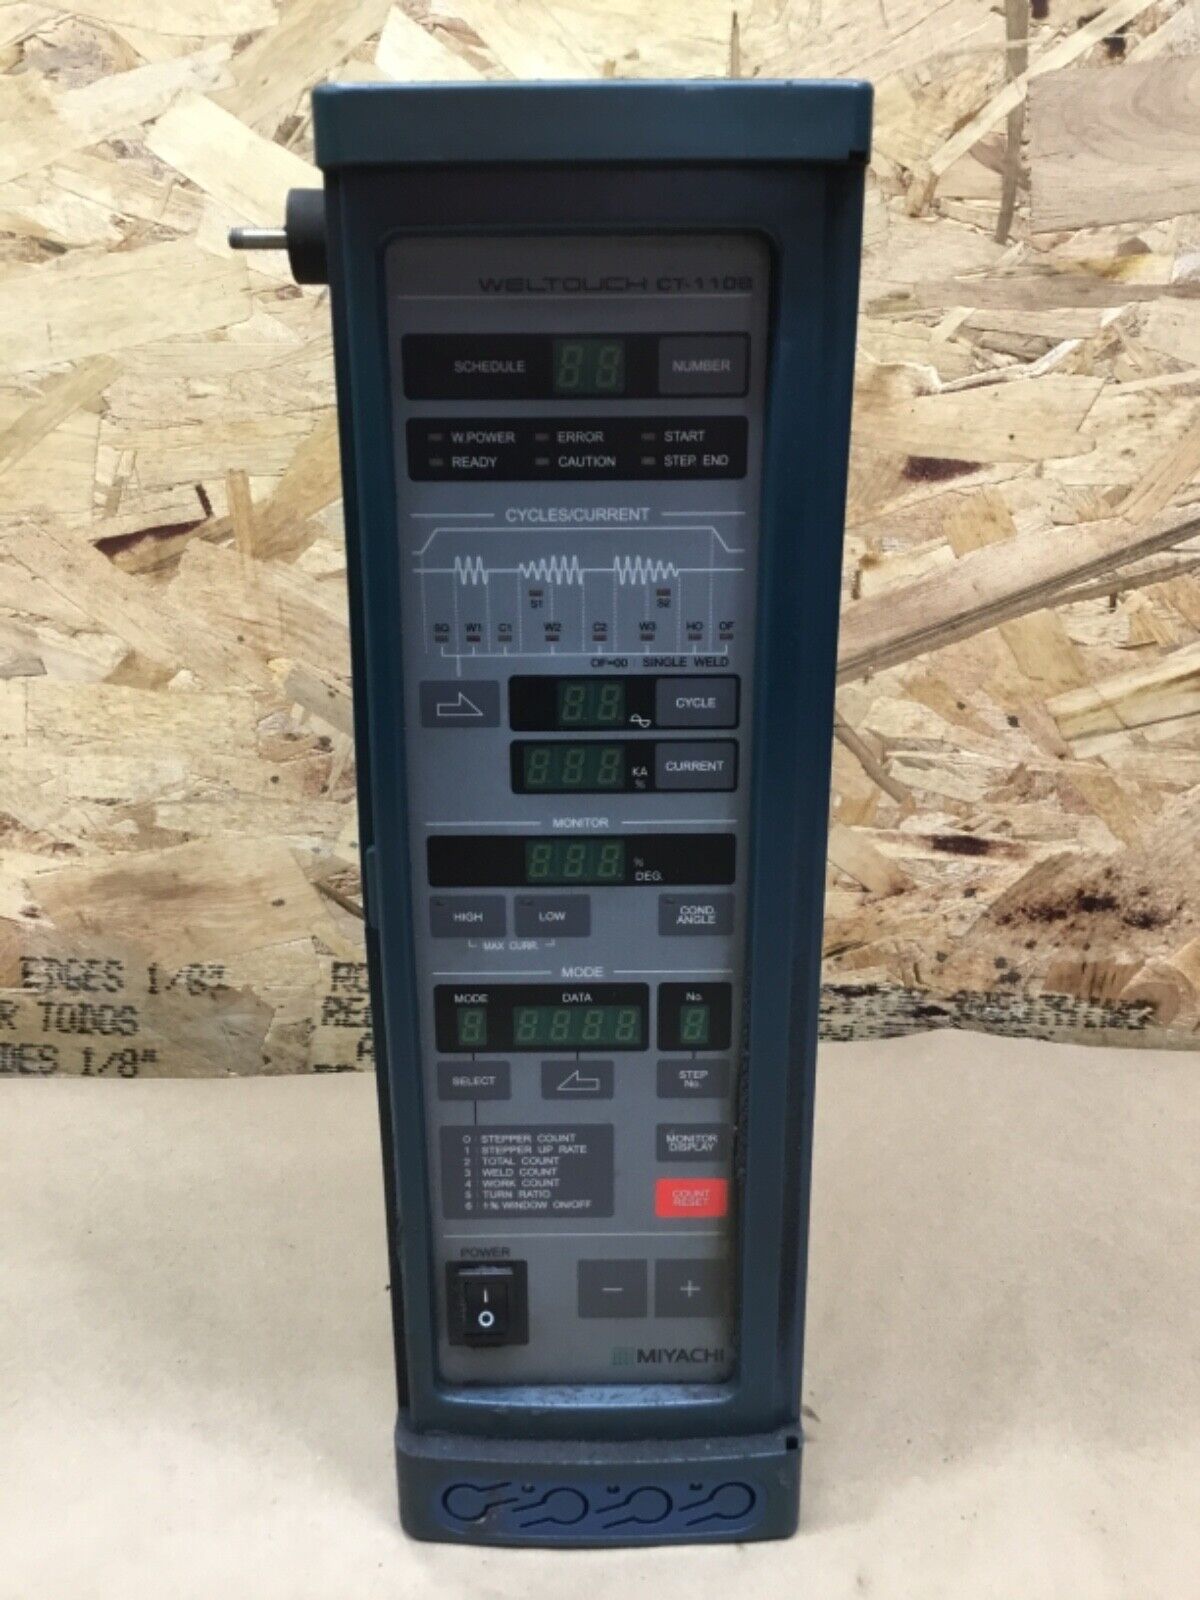 MIYACHI WELD CONTROLLER WELTOUCH AD San Jose Mall #20A73PR2 Al sold out. CT-110B